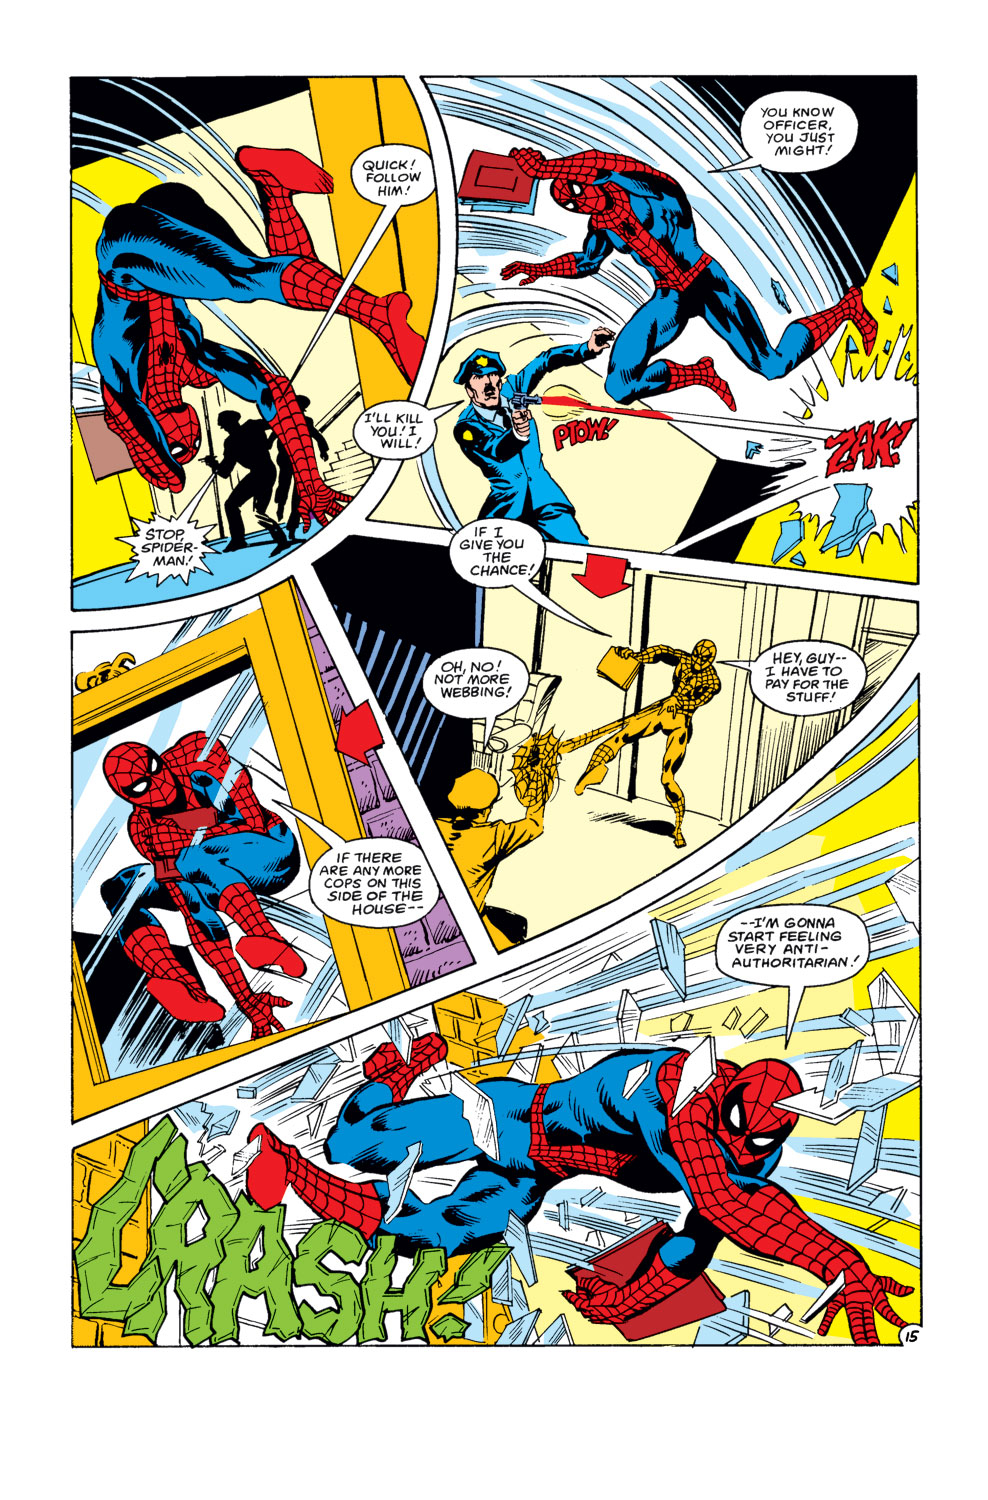 What If? (1977) issue 30 - Spider-Man's clone lived - Page 16